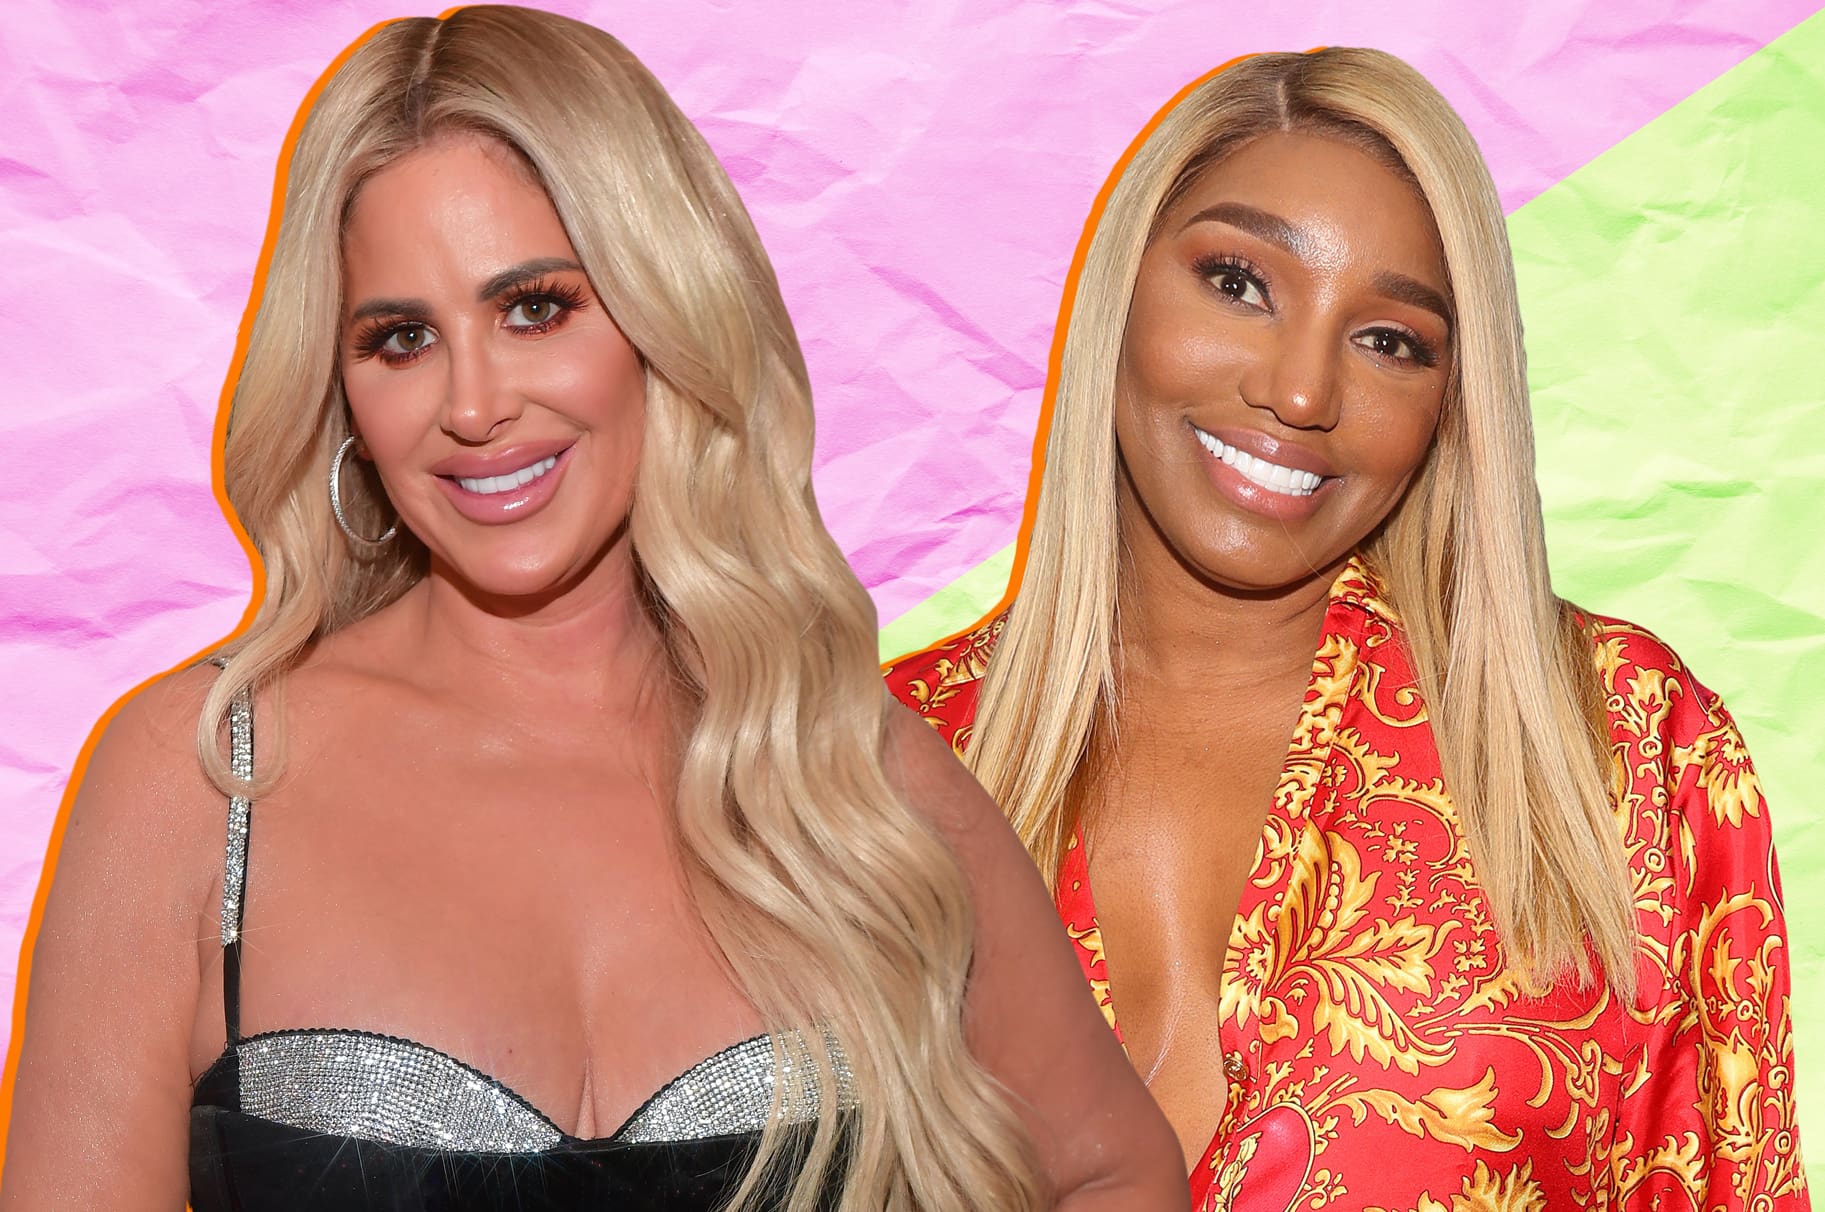 NeNe Leakes And Kim Zolciak Are Going Live On IG And YouTube Today!